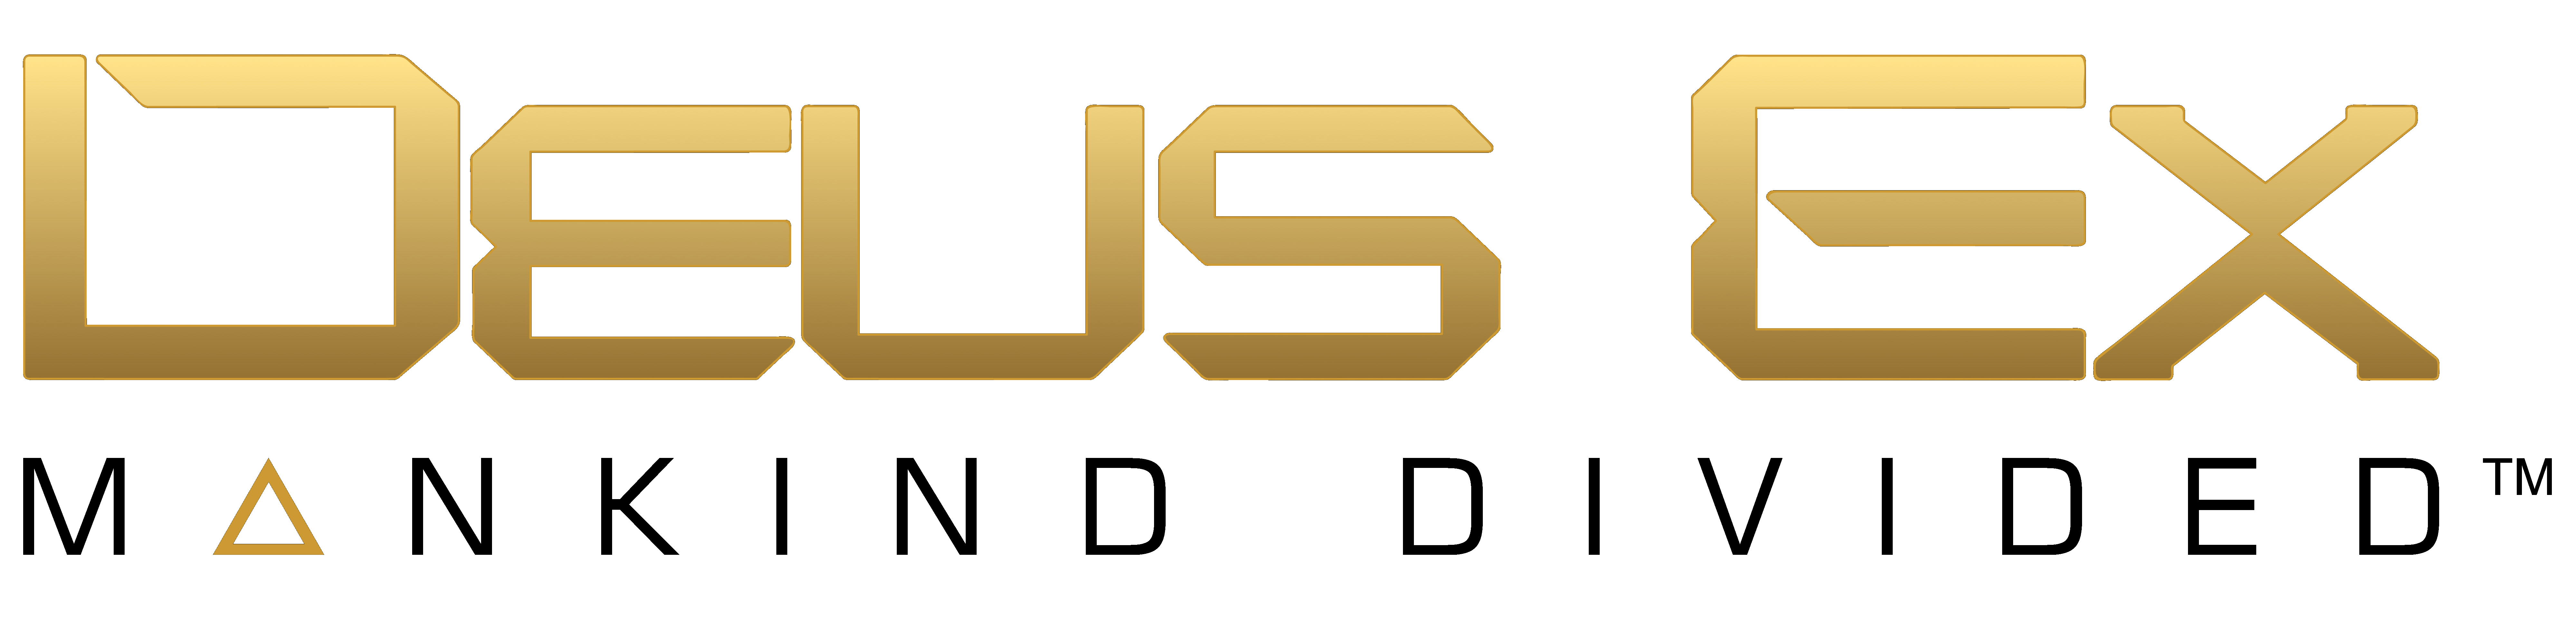 Mankind Logo - File:Deus Ex Mankind Divided logo.png - Wikimedia Commons